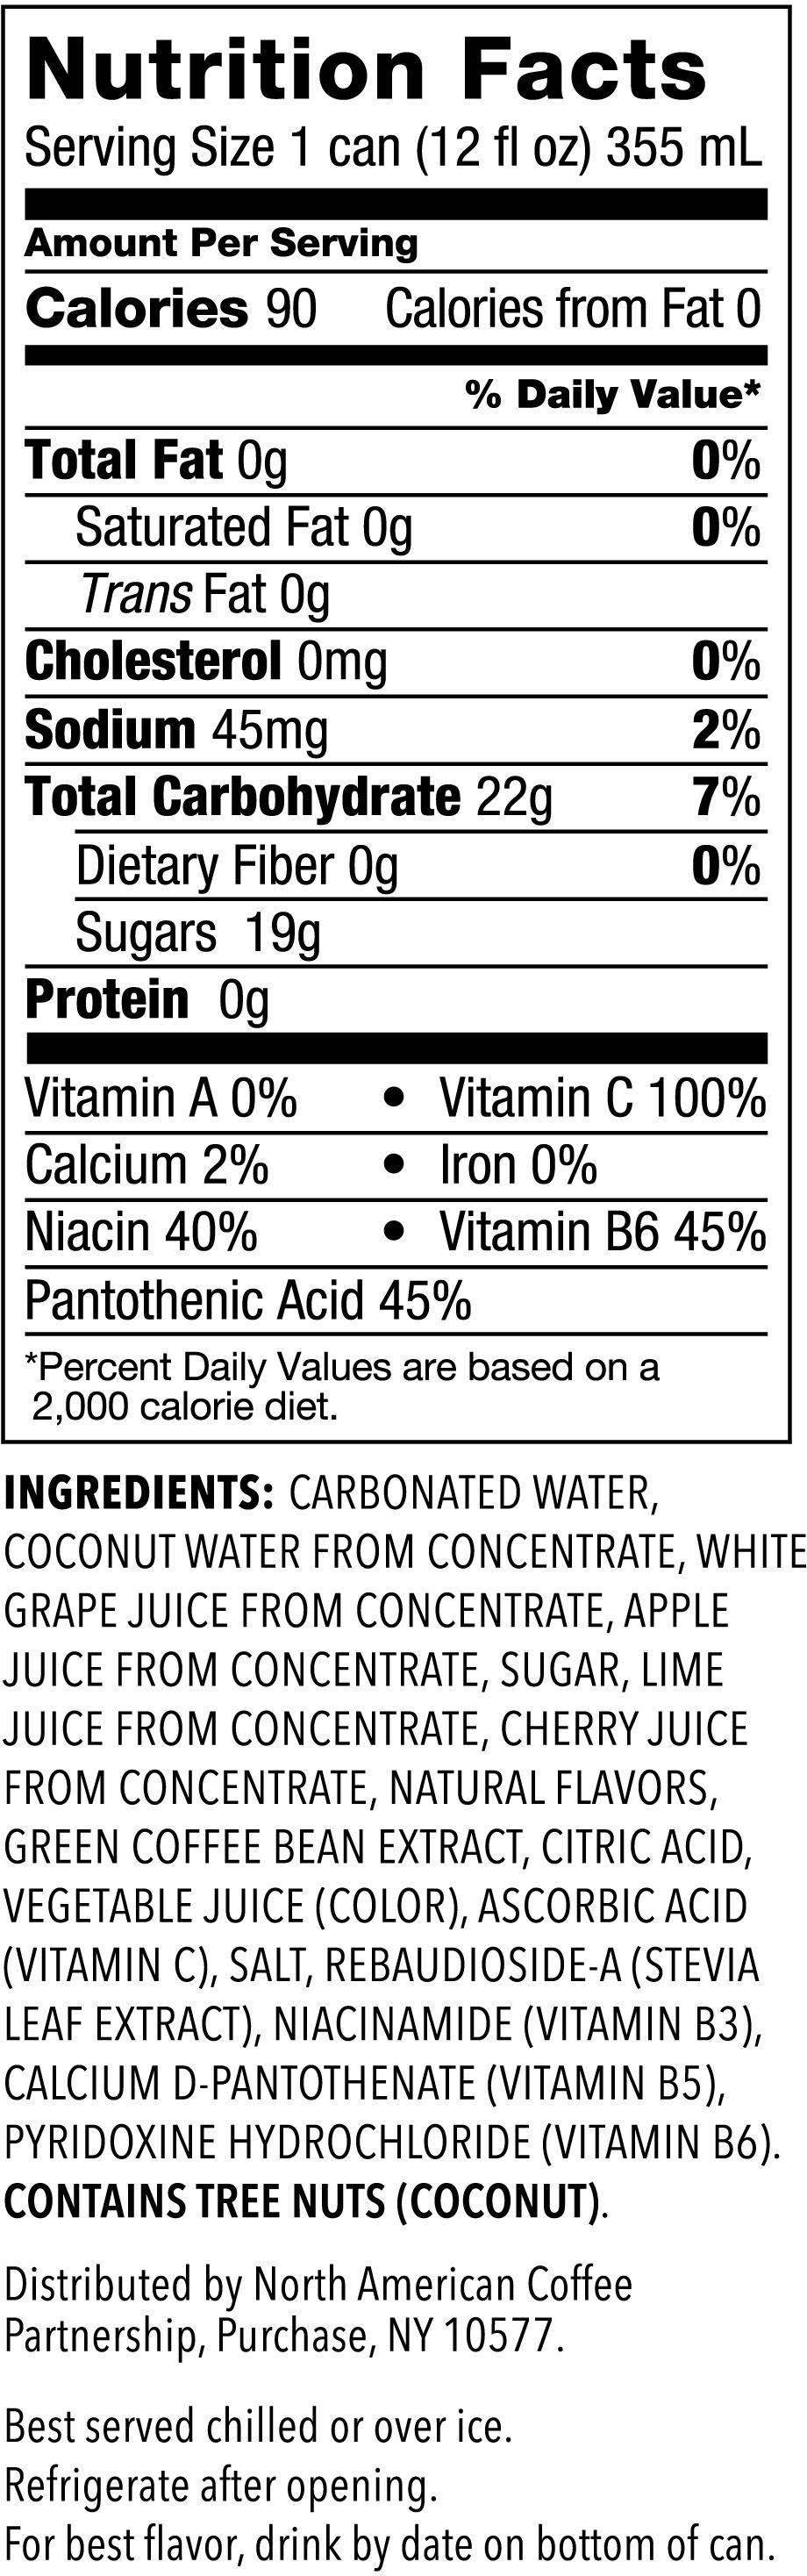 Image describing nutrition information for product Starbucks Refreshers Black Cherry Limeade